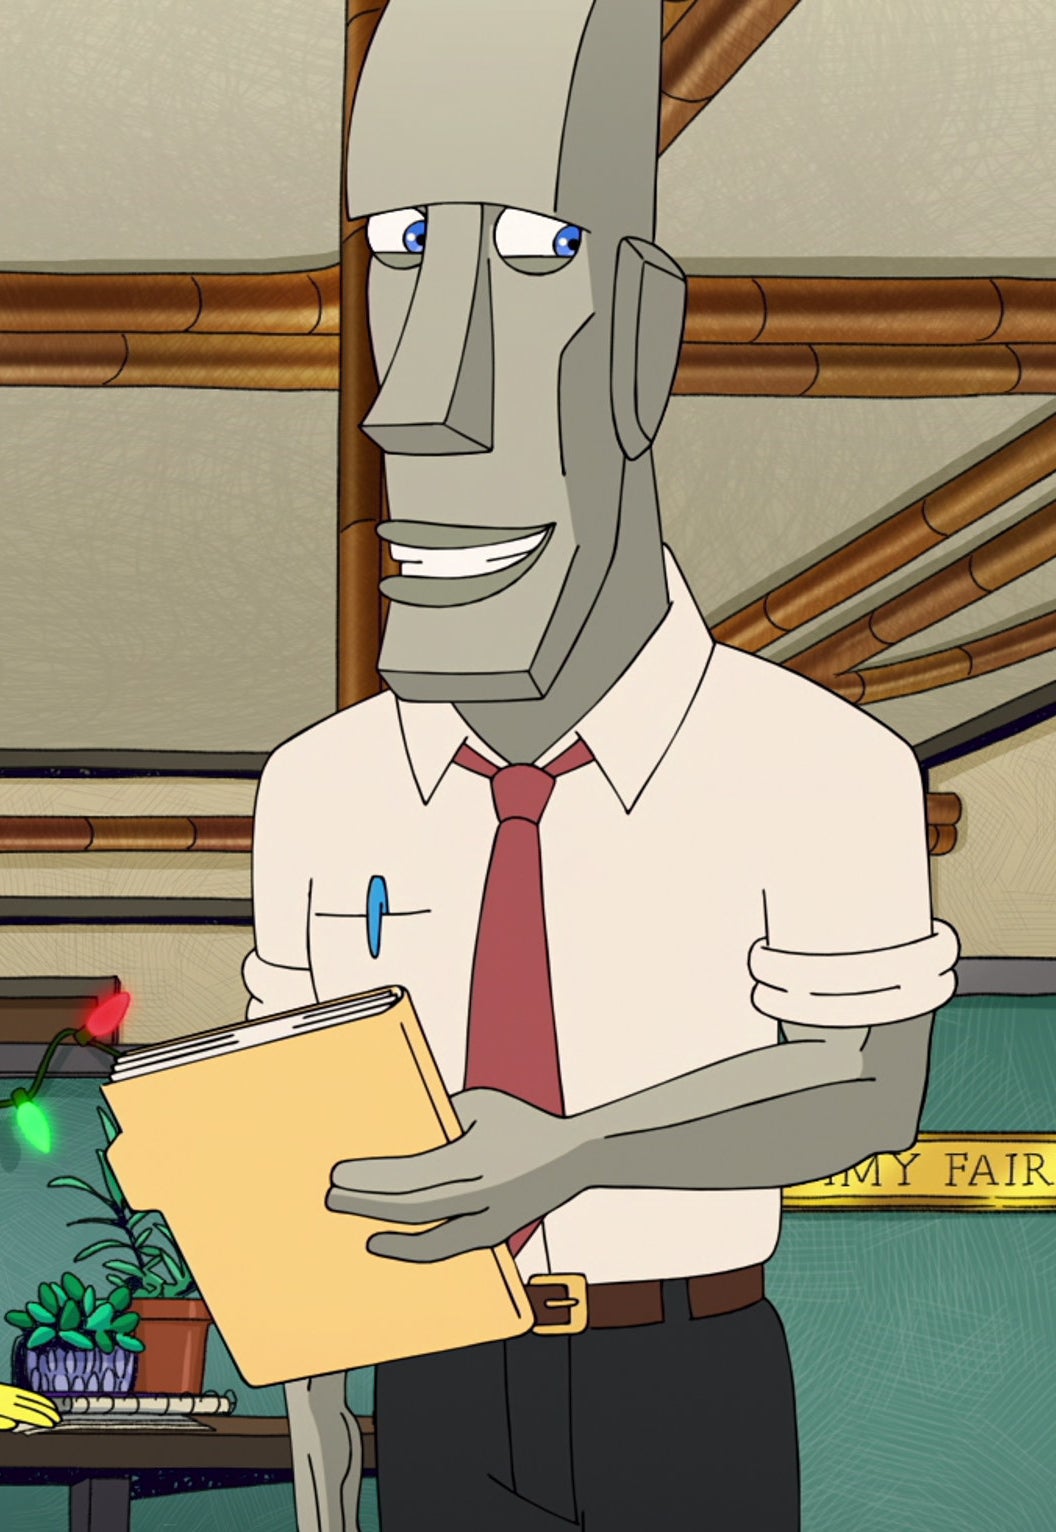 Pete is an anthropomorphic rock wearing a dress shirt, tie, and slacks